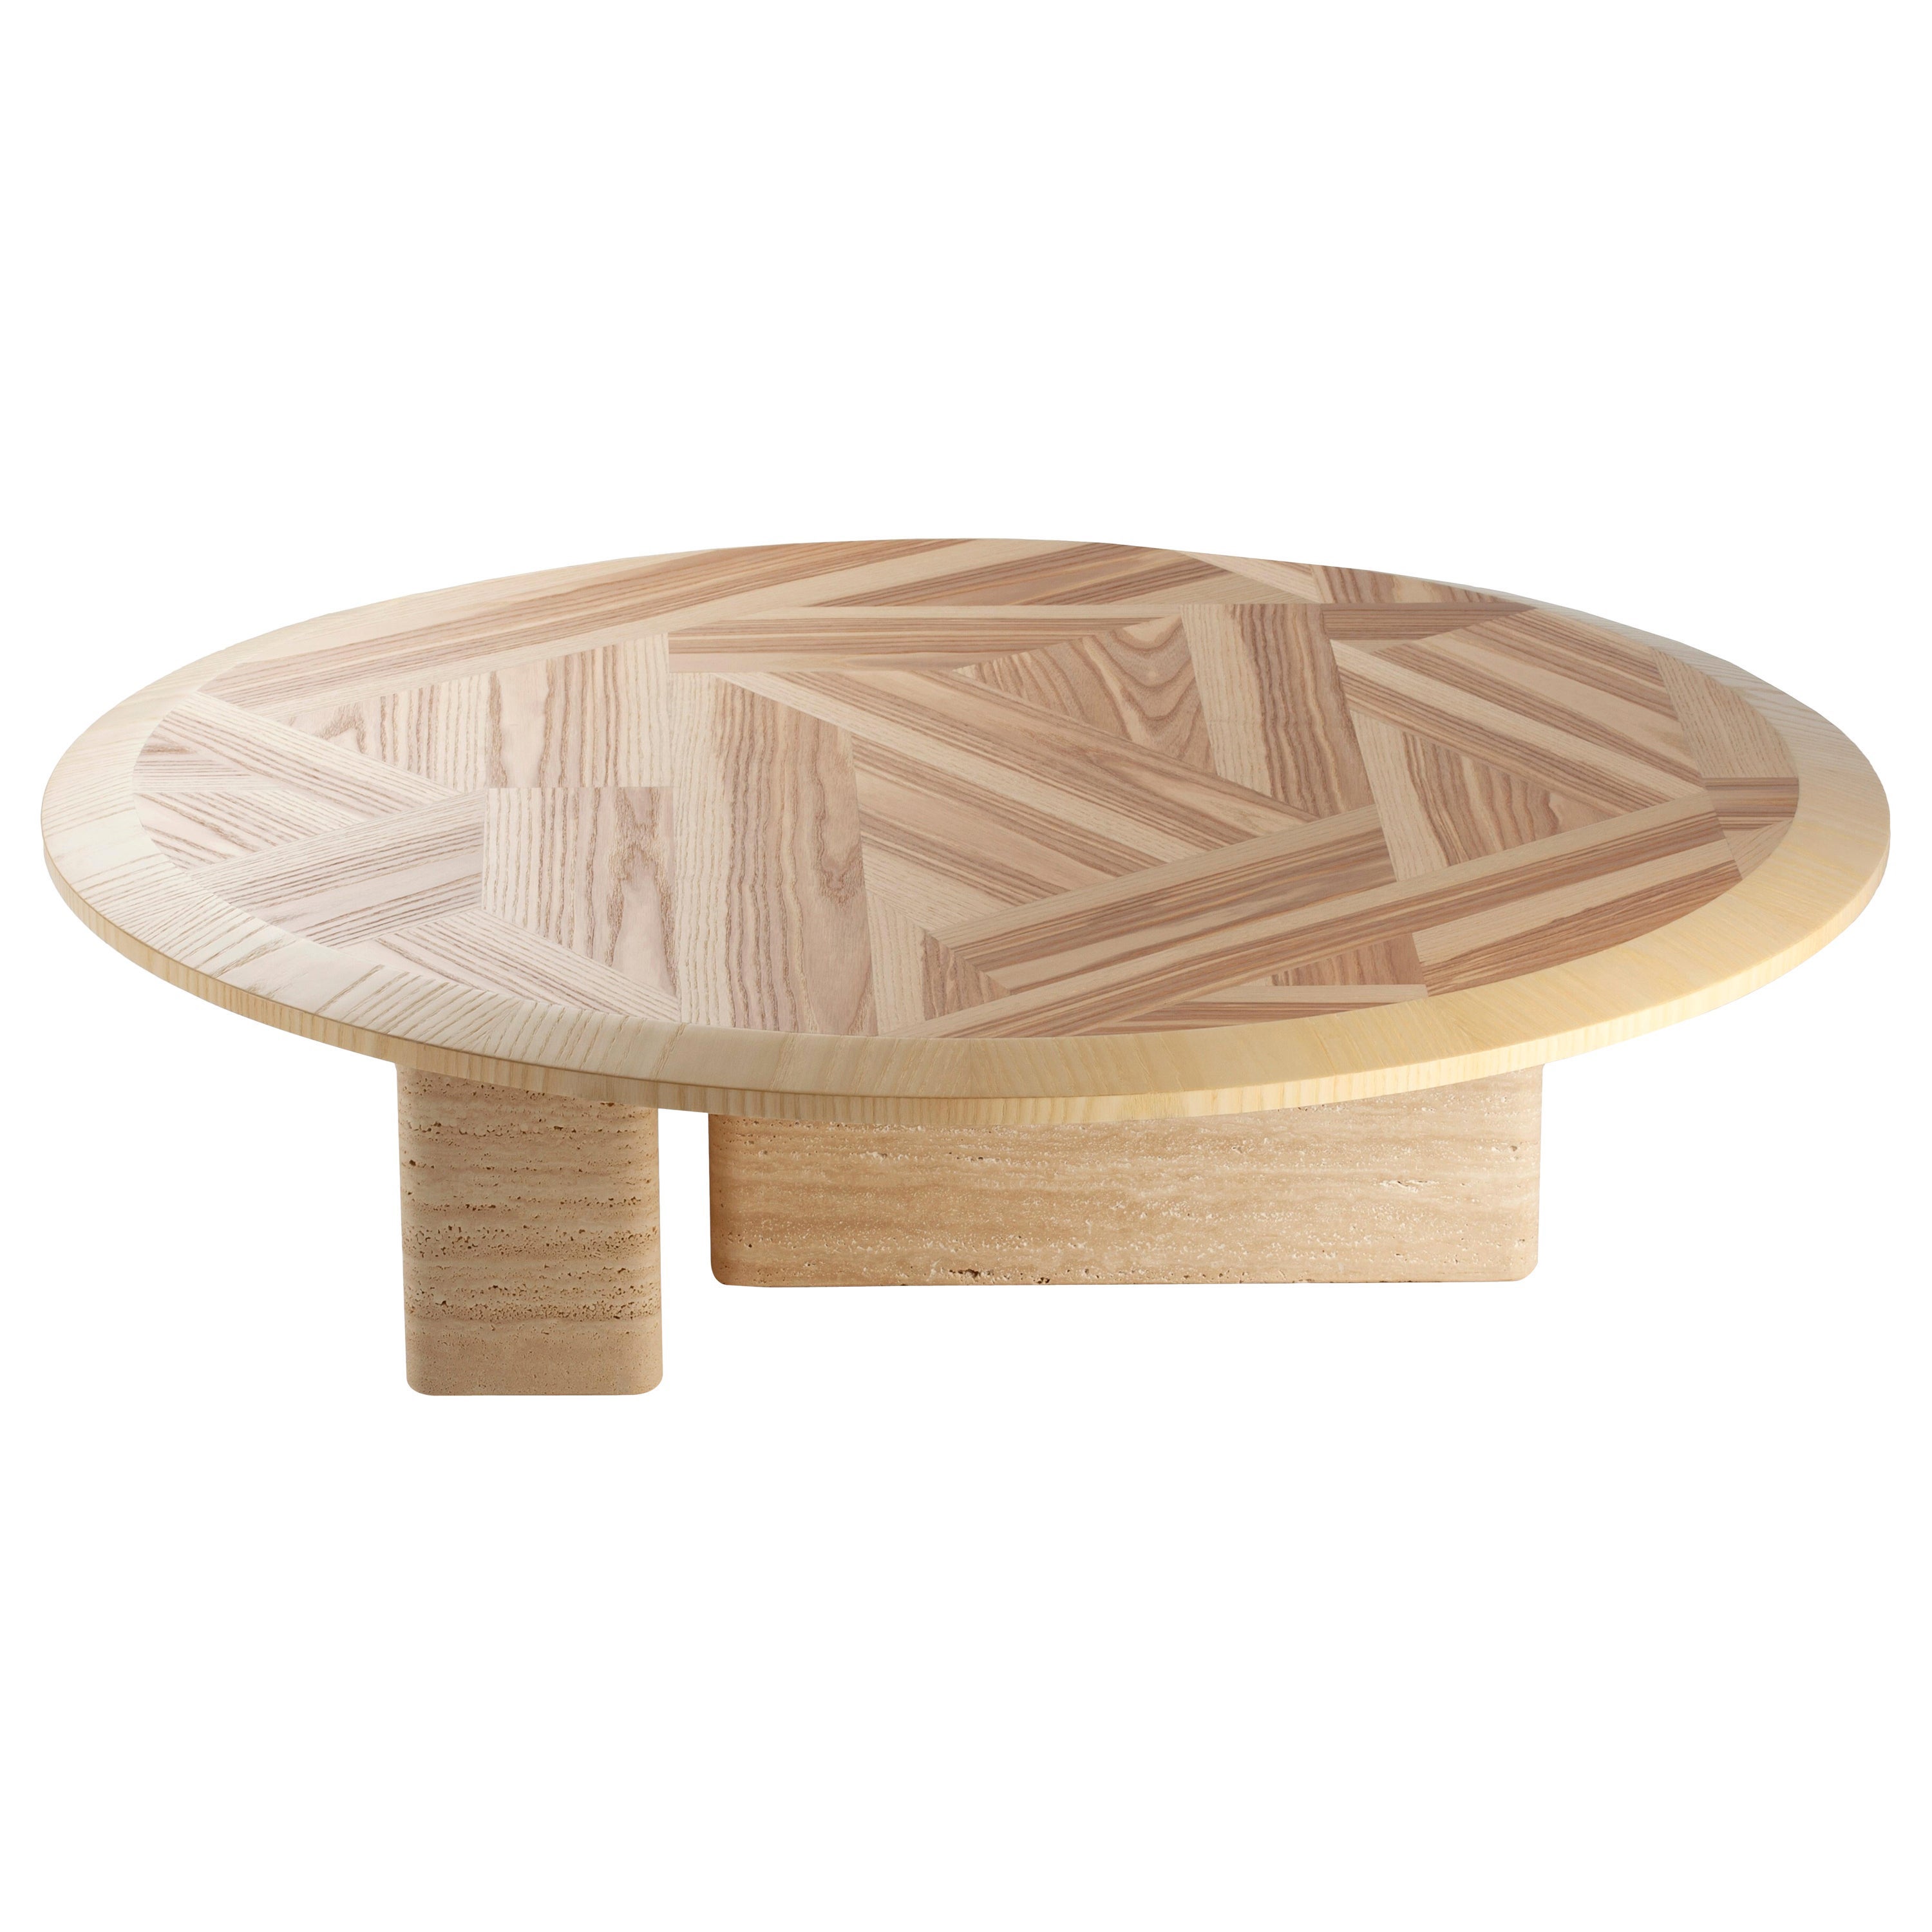 L’anamour Center Table by Dooq For Sale